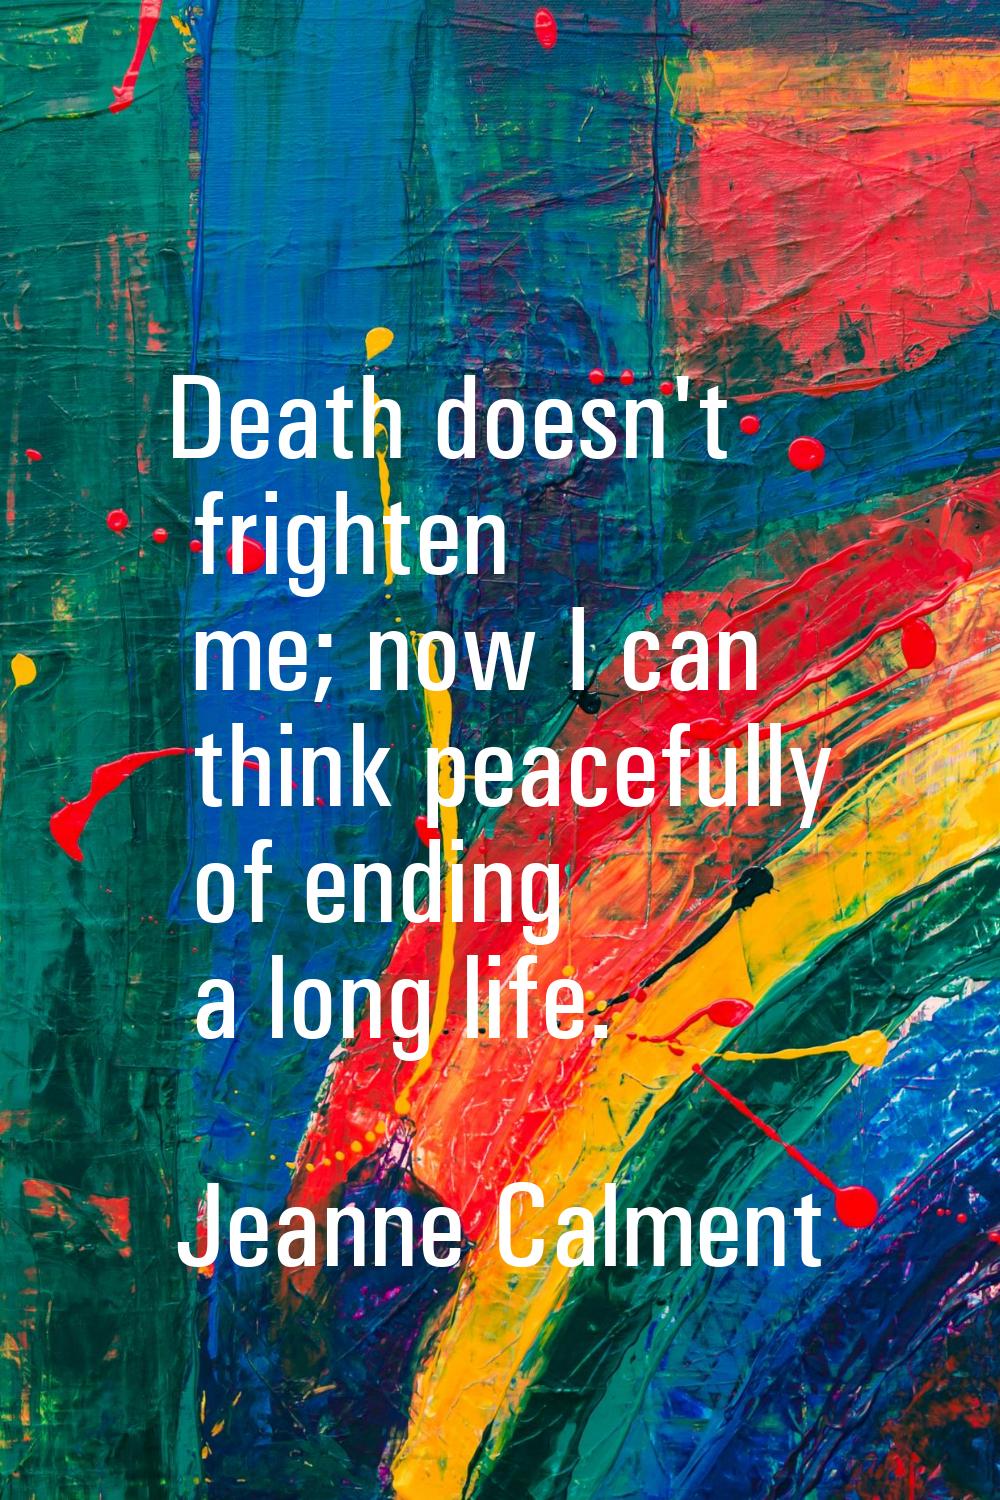 Death doesn't frighten me; now I can think peacefully of ending a long life.